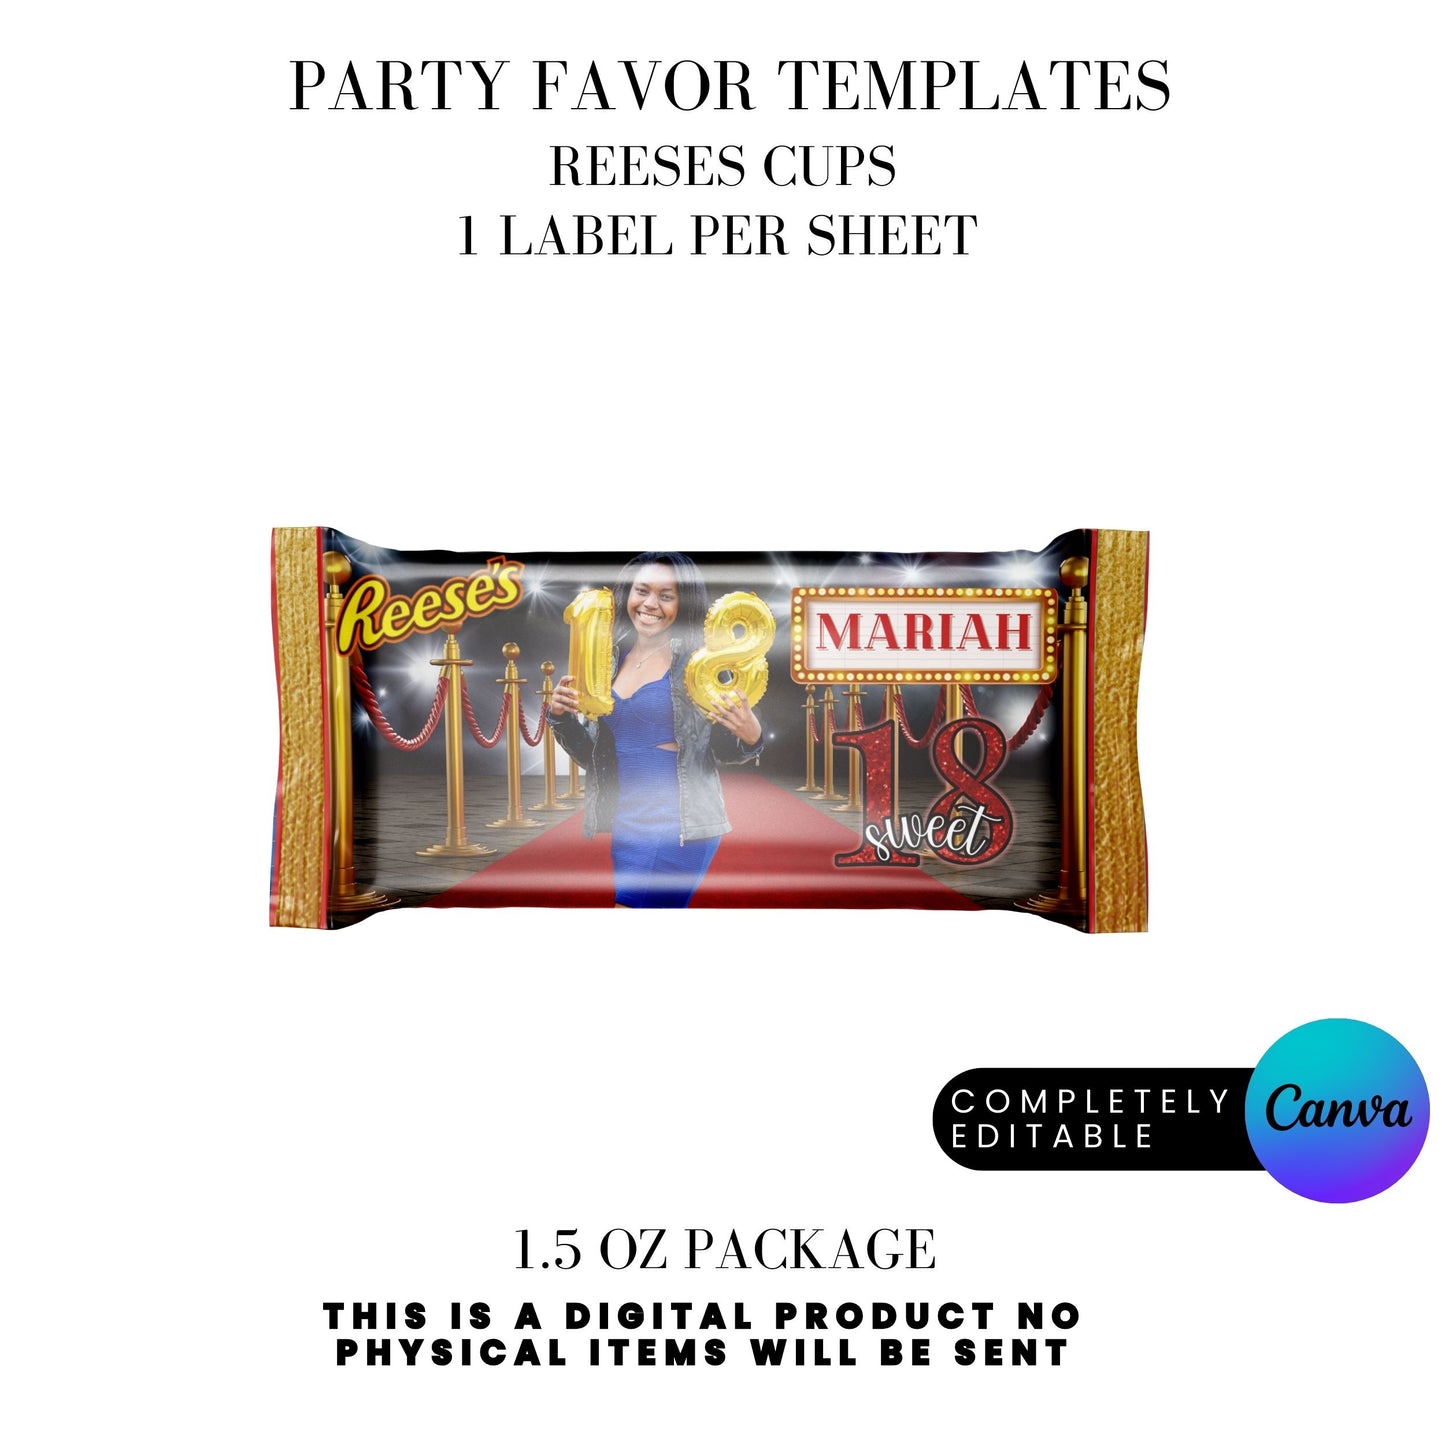 Hollywood Red Carpet Birthday Party Favors Templates Bundle